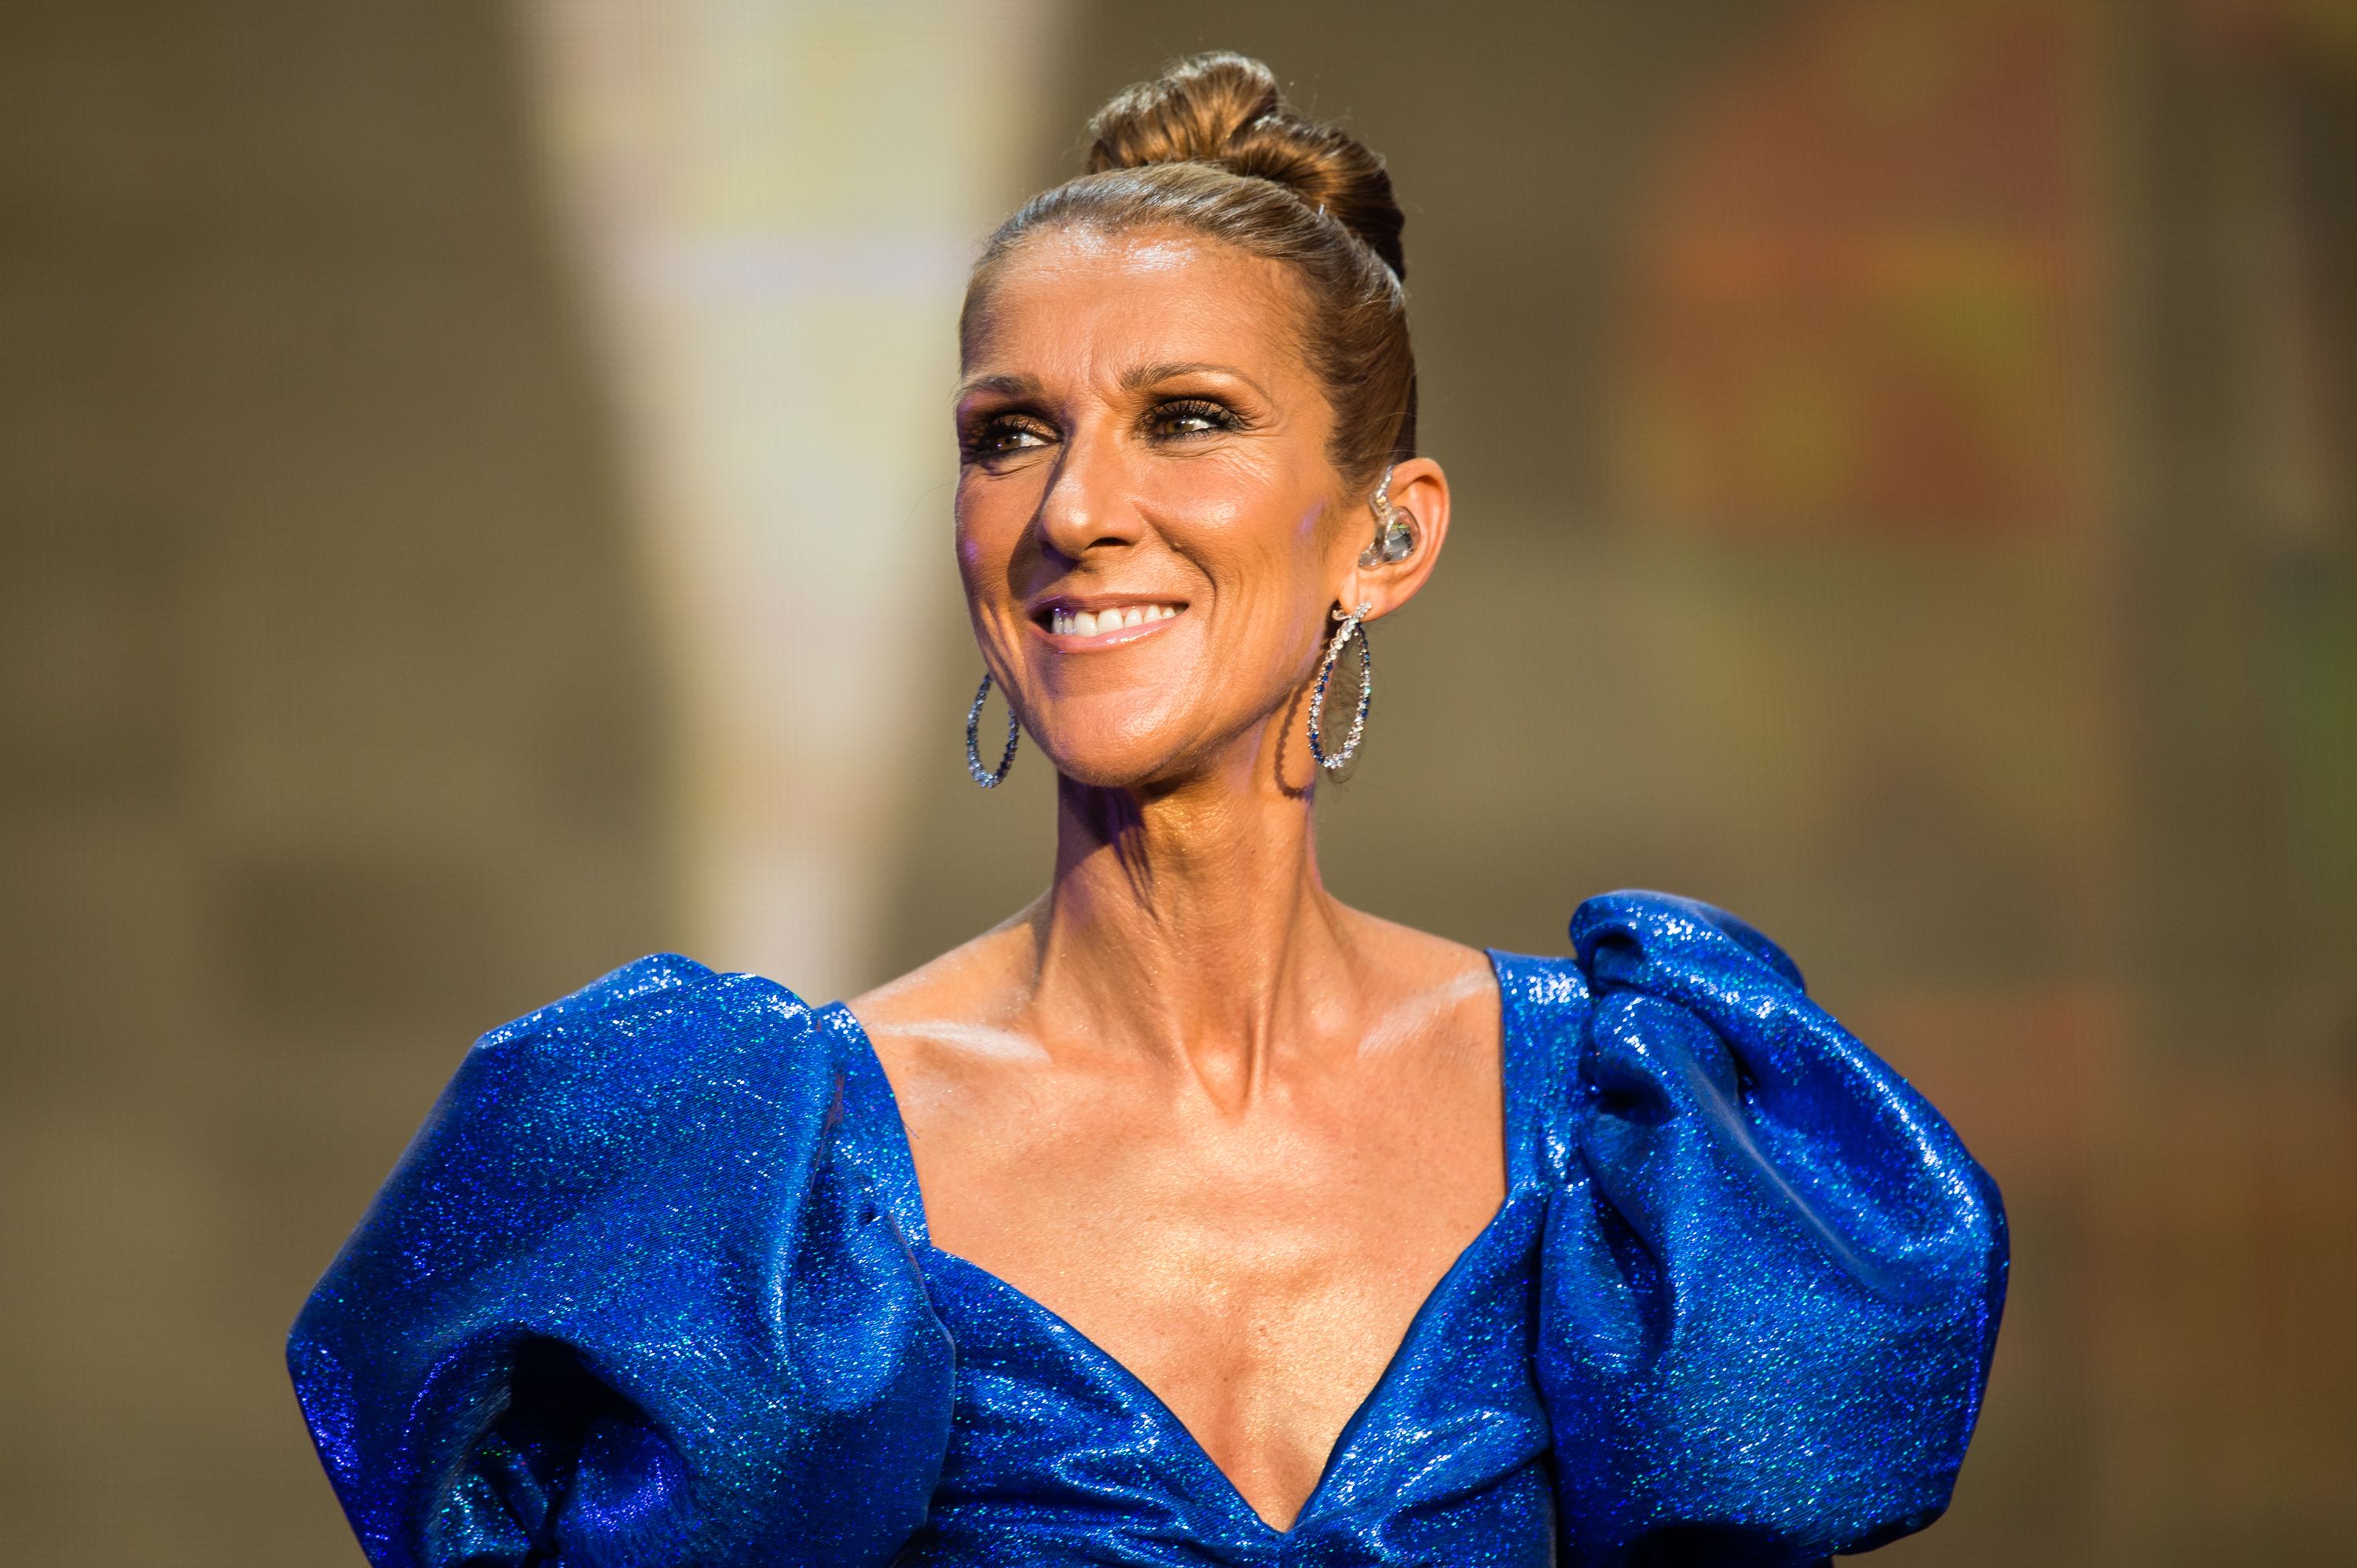 Celebrities Up for Céline Dion After She Posted Heartbreaking Instagram